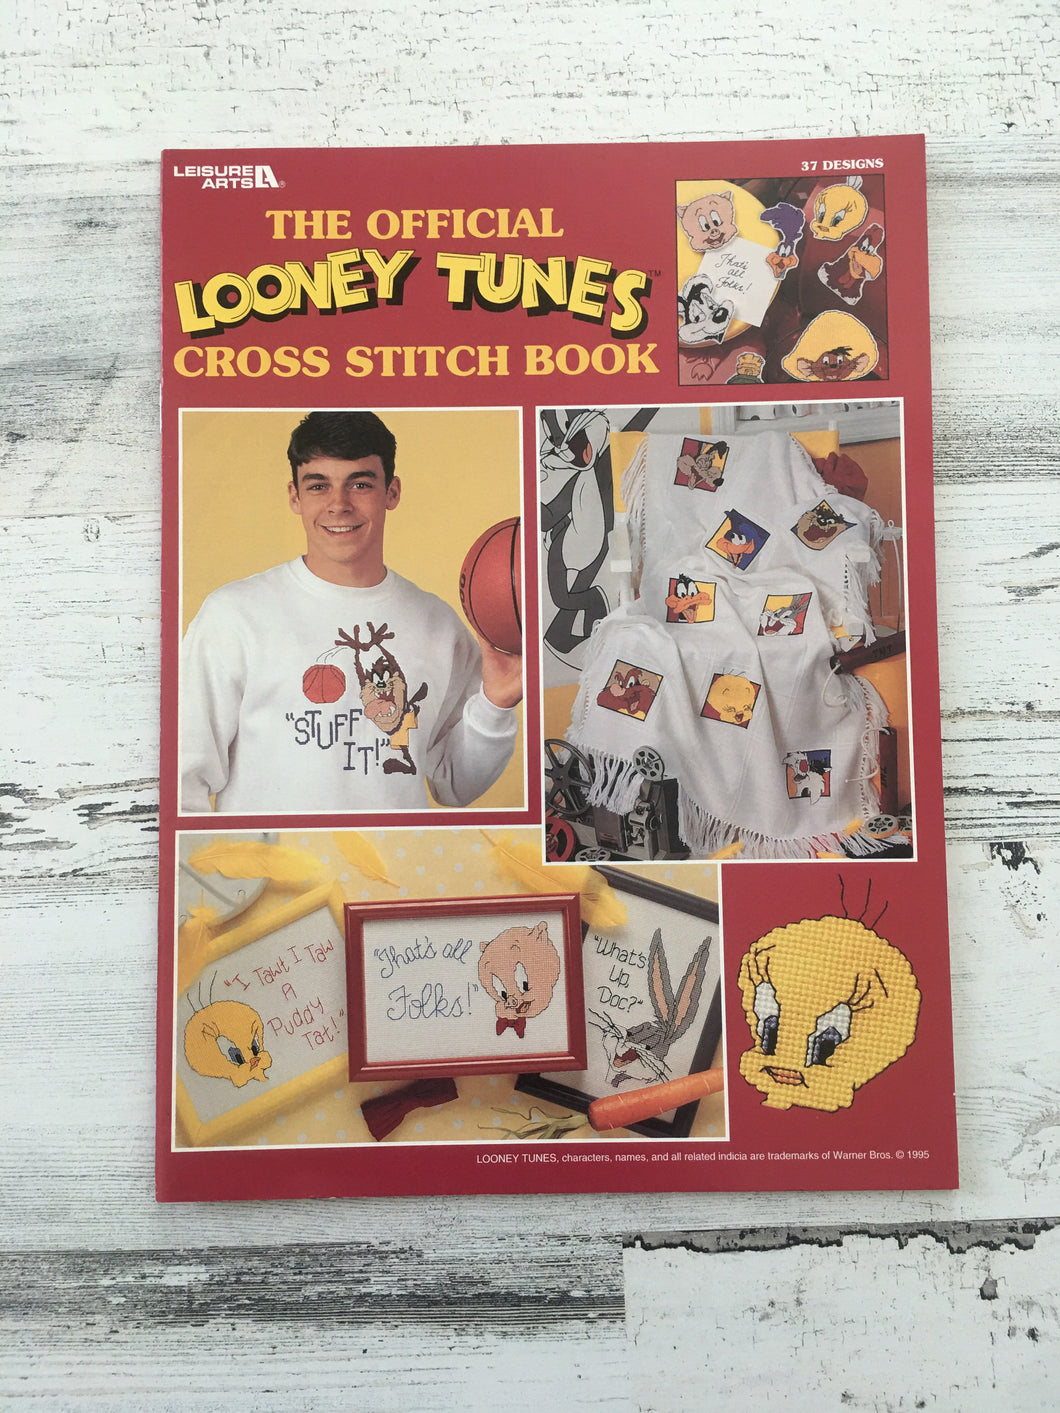 The Official Looney Tunes Cross Stitch Book 1995, 37 Designs